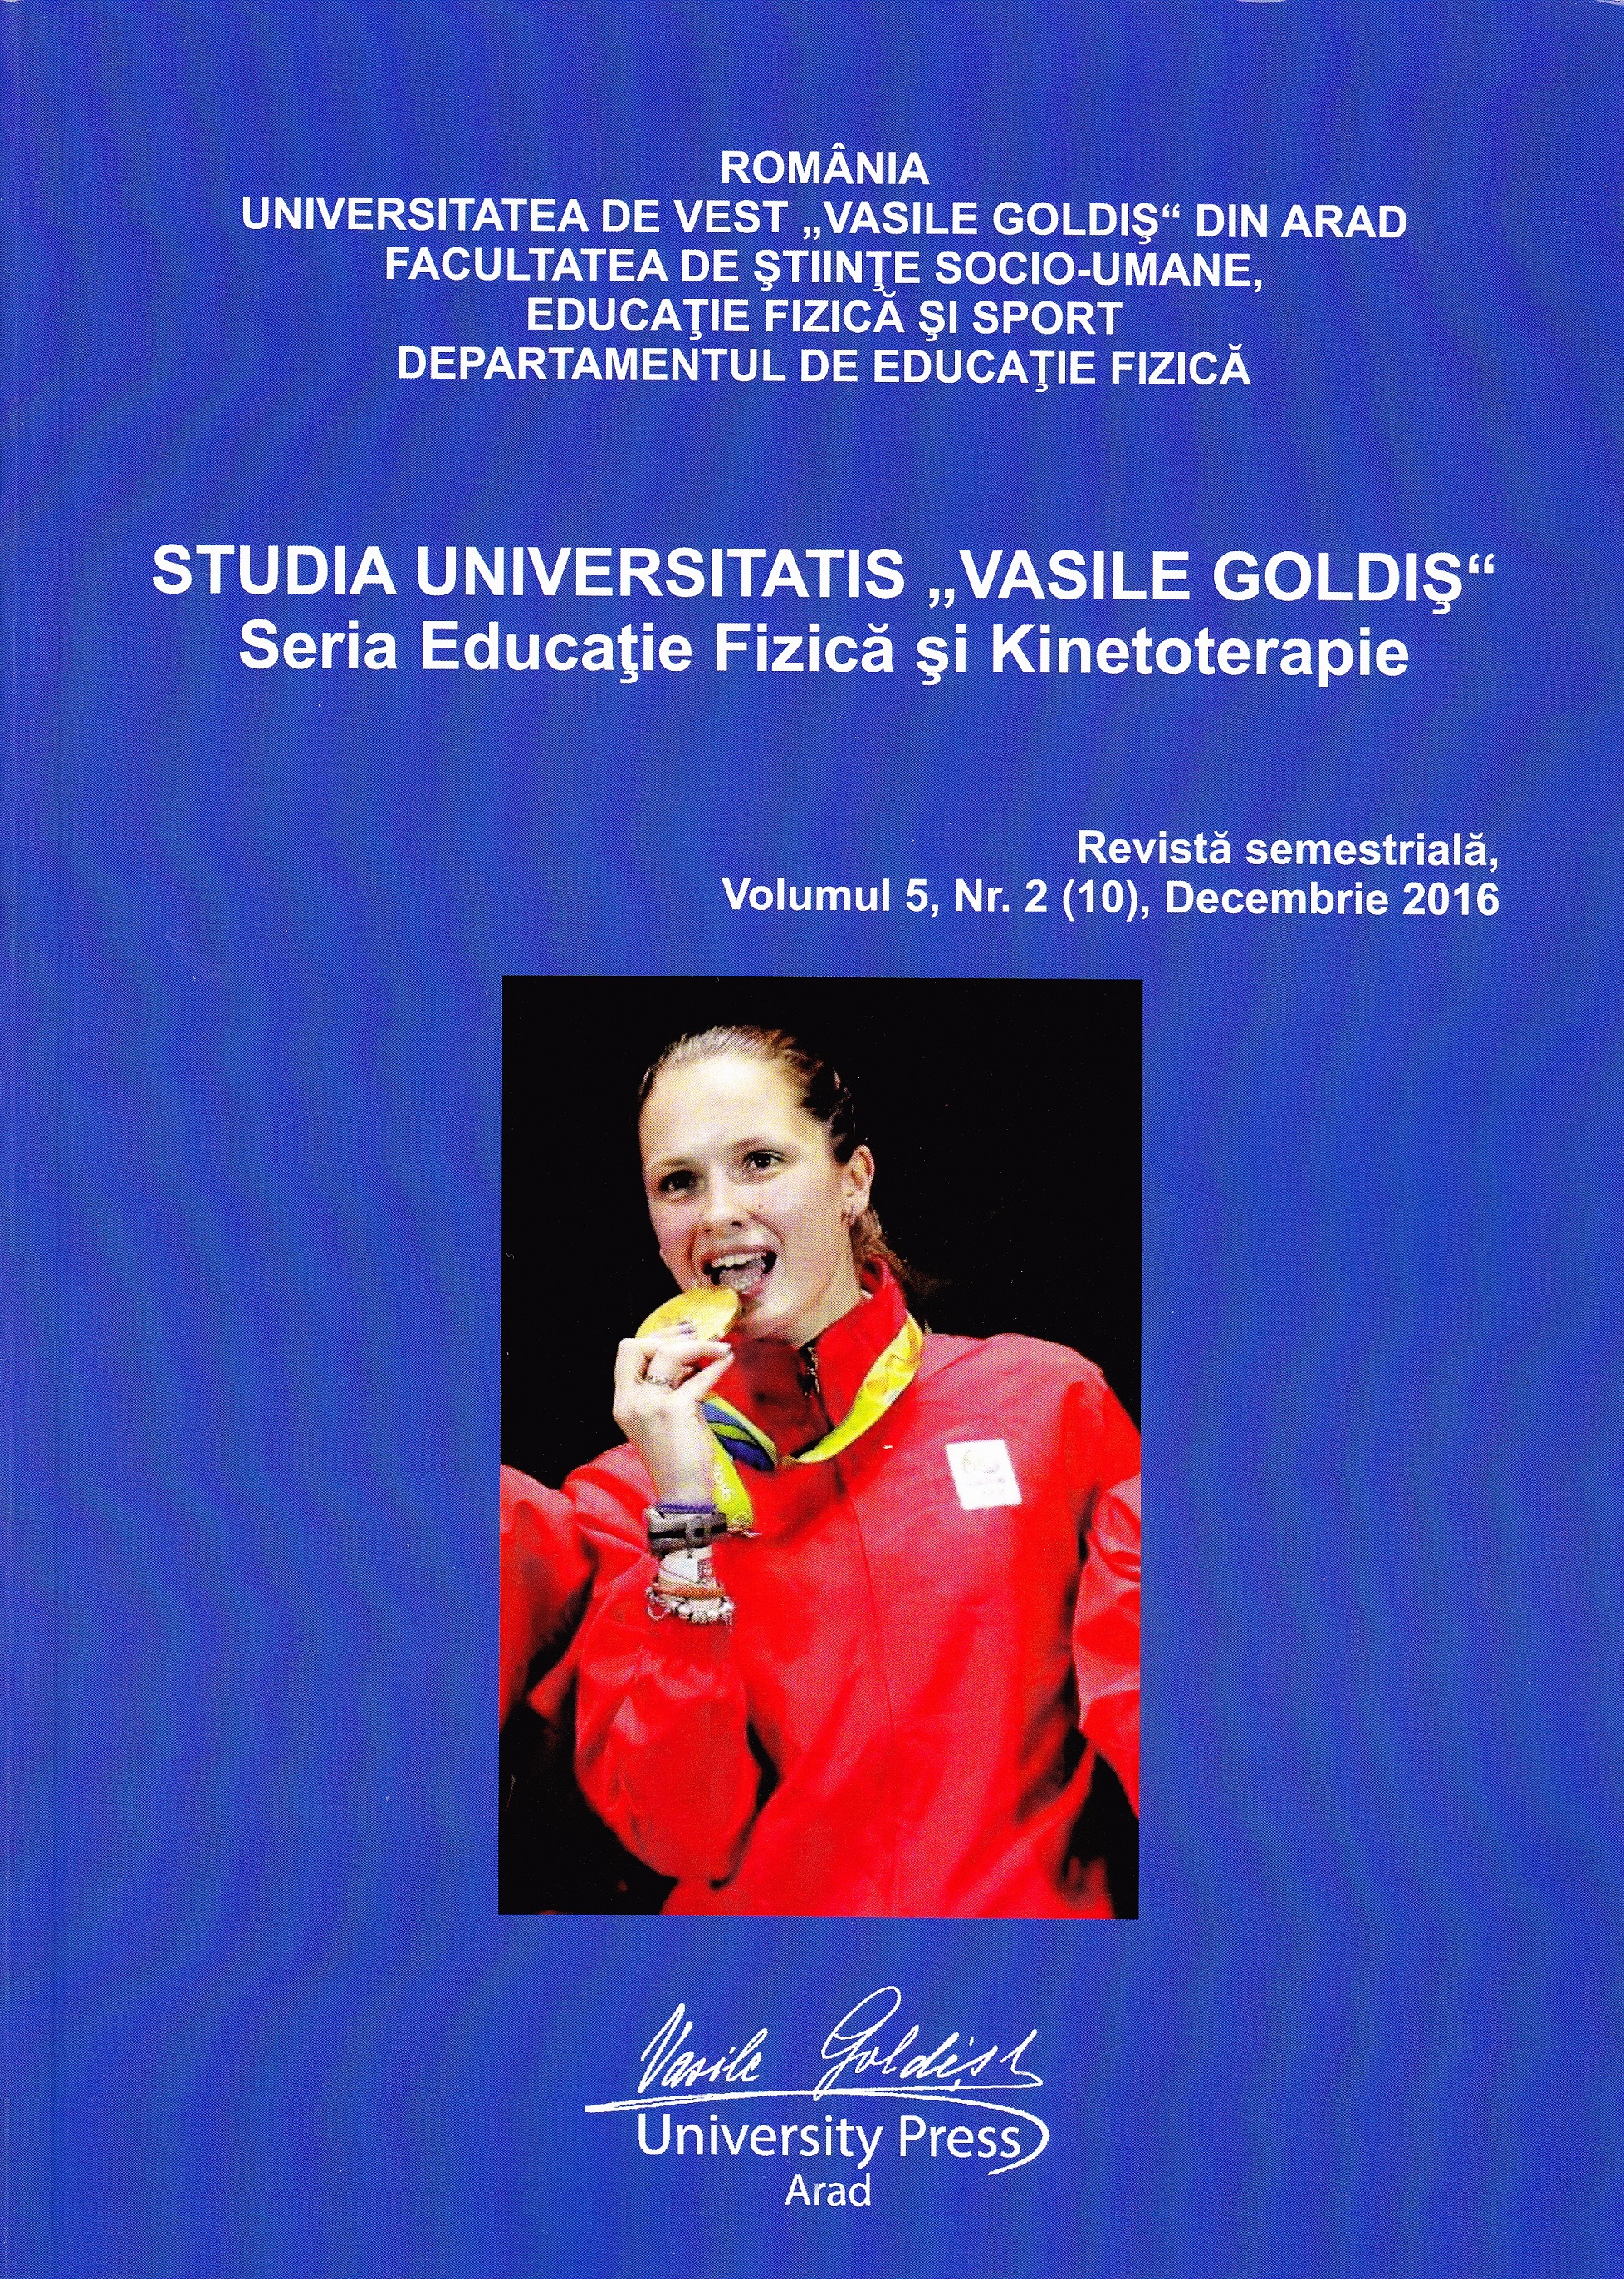 Simona Pop - Gold Medal at the Olympic Games from Rio de Janeiro in 2016 with the Romanian National ÉpÃ©e Team